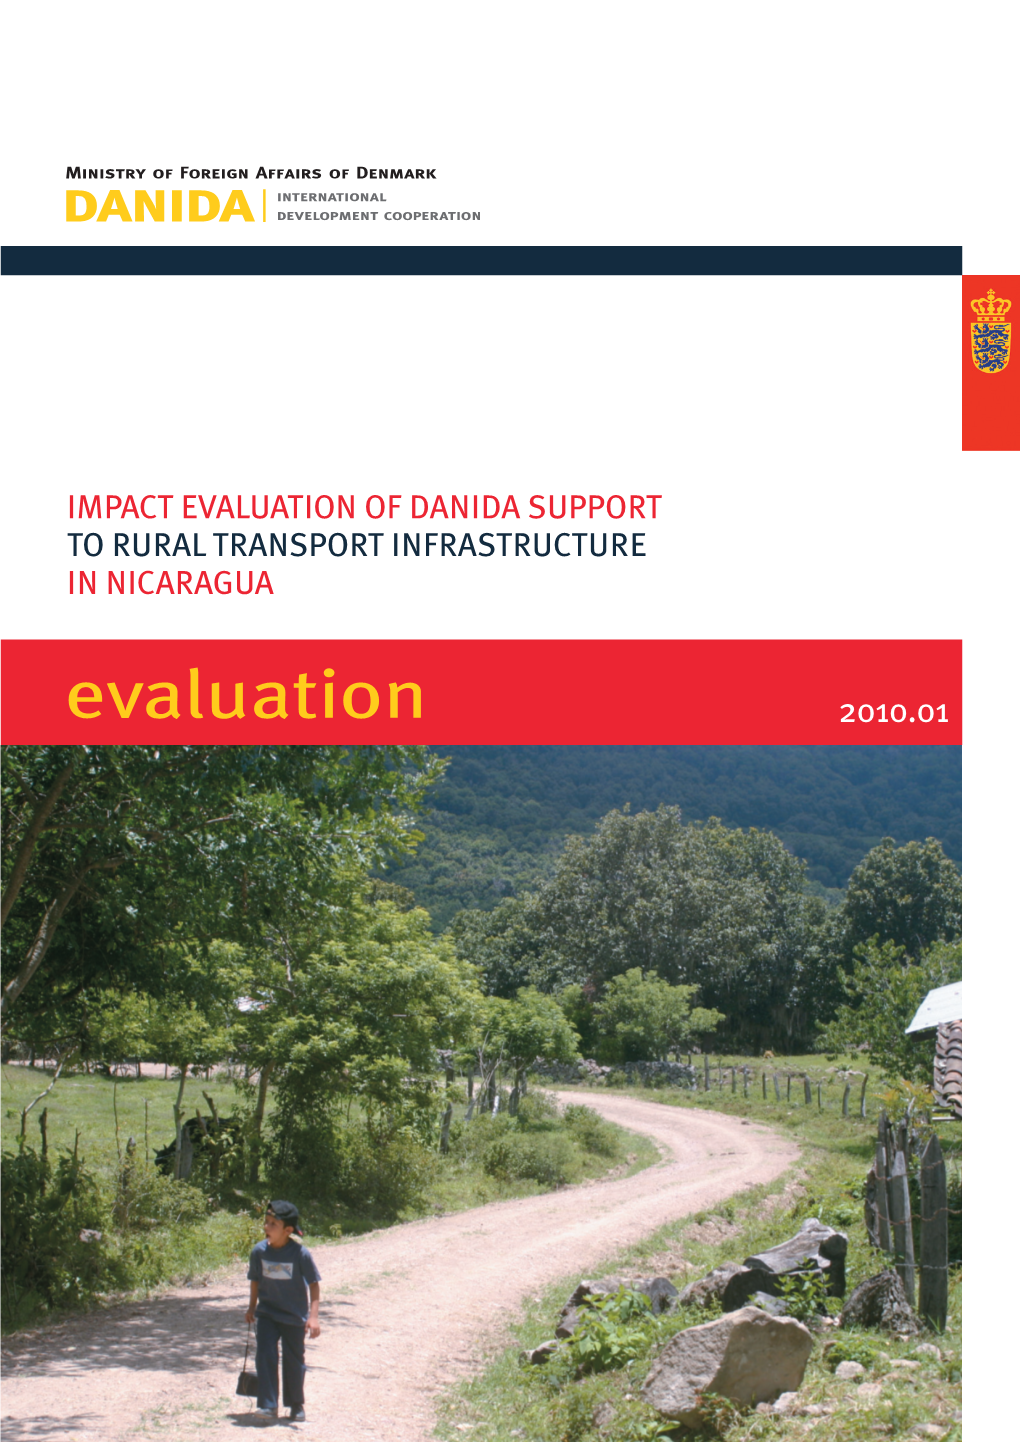 Impact Evaluation of Danida Support to Rural Transport Infrastructure in Nicaragua 2010.01